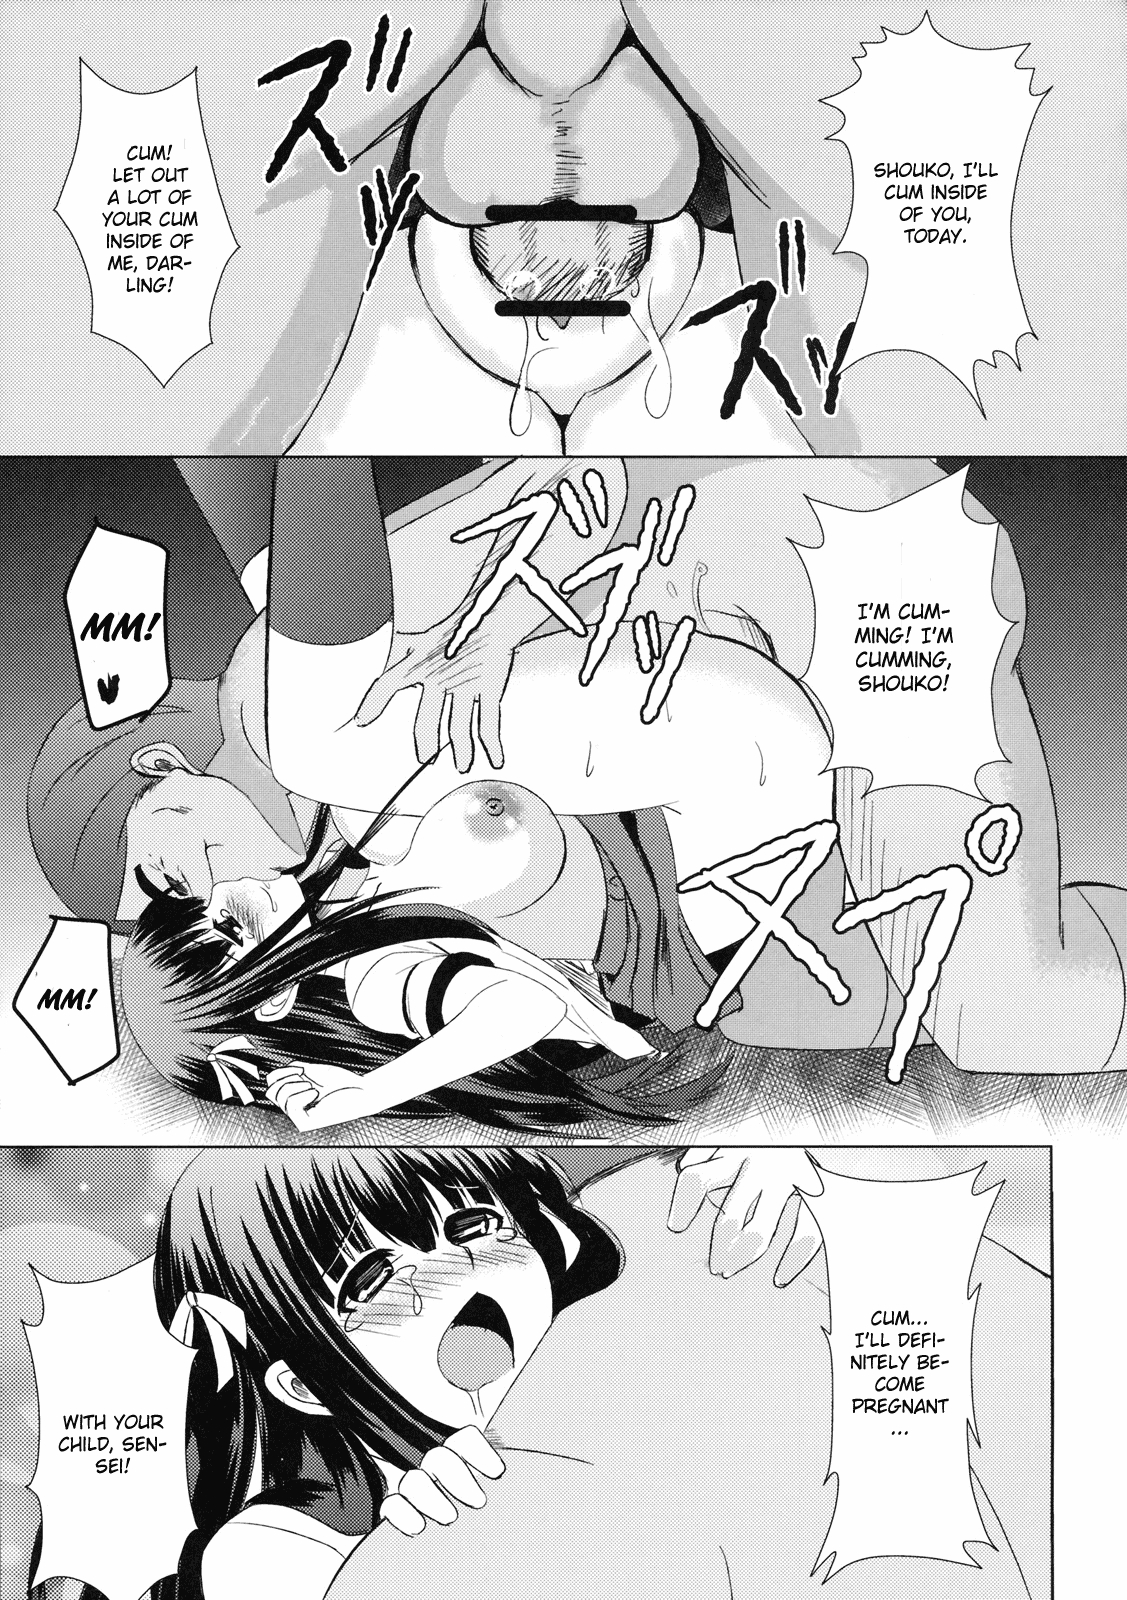 (COMIC1☆4) [PTD (Tatsuhiko)] Iron finger from hell (Baka to Test to Shoukanju) [English] [One of a Kind Productions] 17